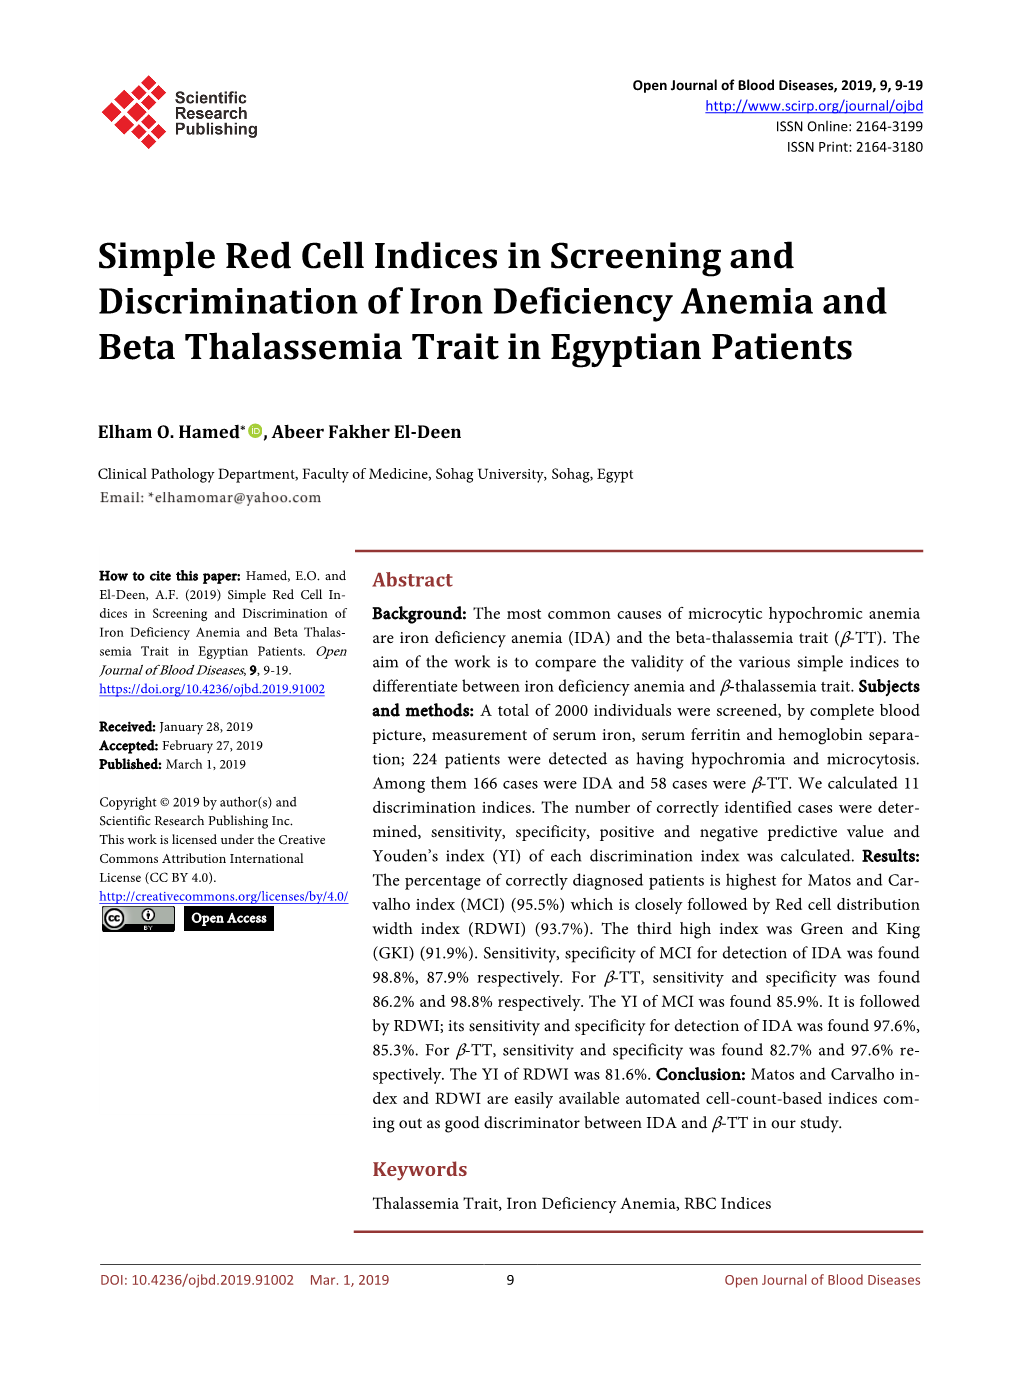 Simple Red Cell Indices in Screening and Discrimination of Iron Deficiency Anemia and Beta Thalassemia Trait in Egyptian Patients